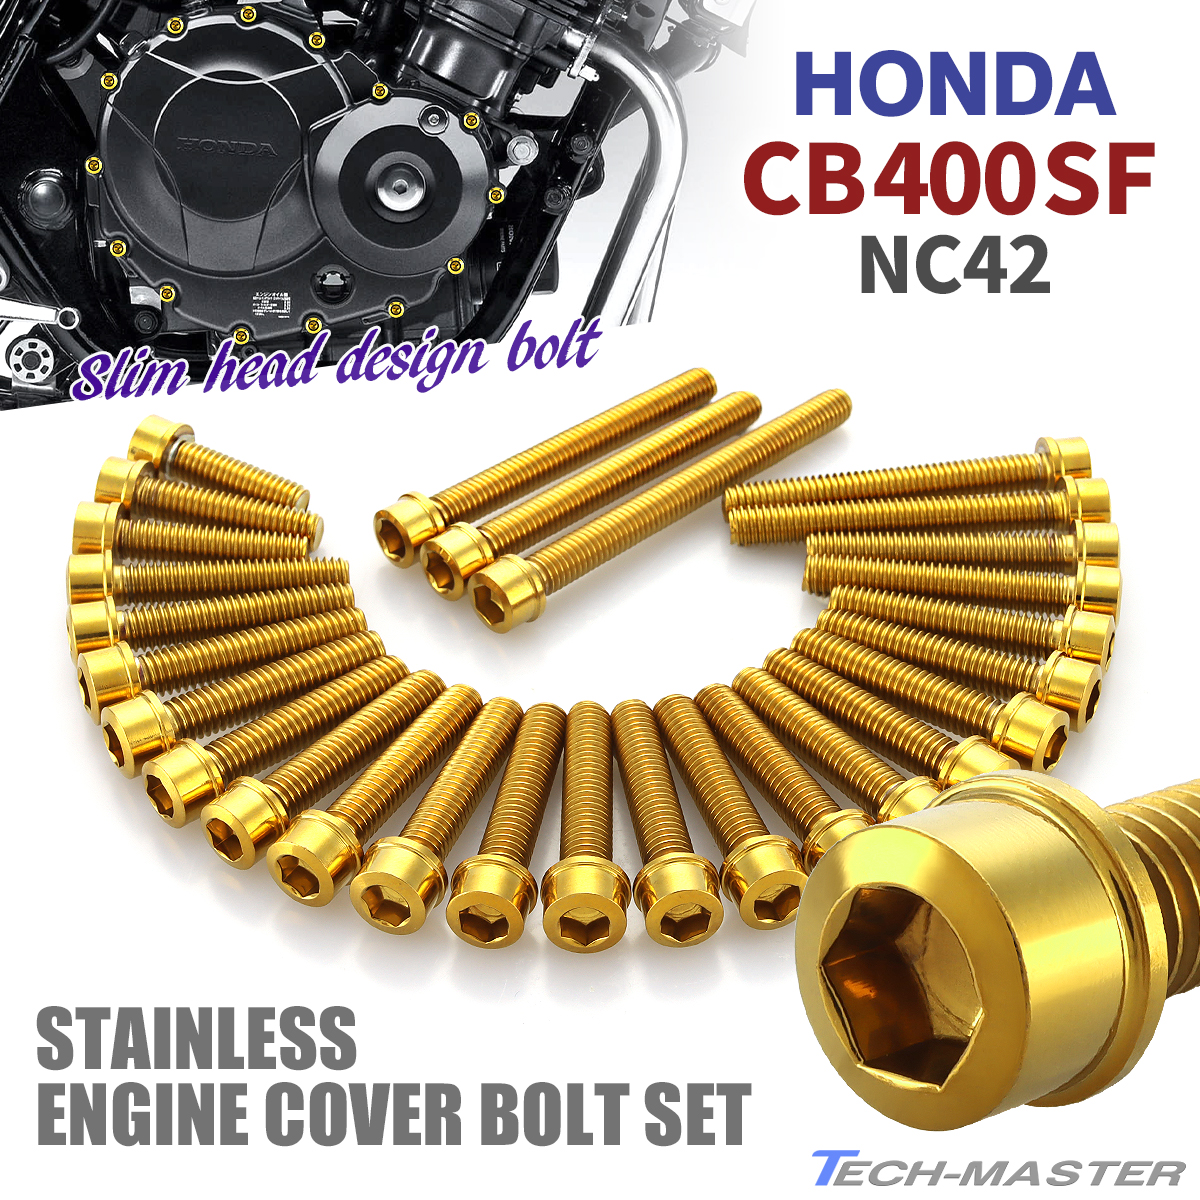 CB400SF NC42 engine cover crankcase bolt 28 pcs set made of stainless steel Honda car for Gold color TB6392